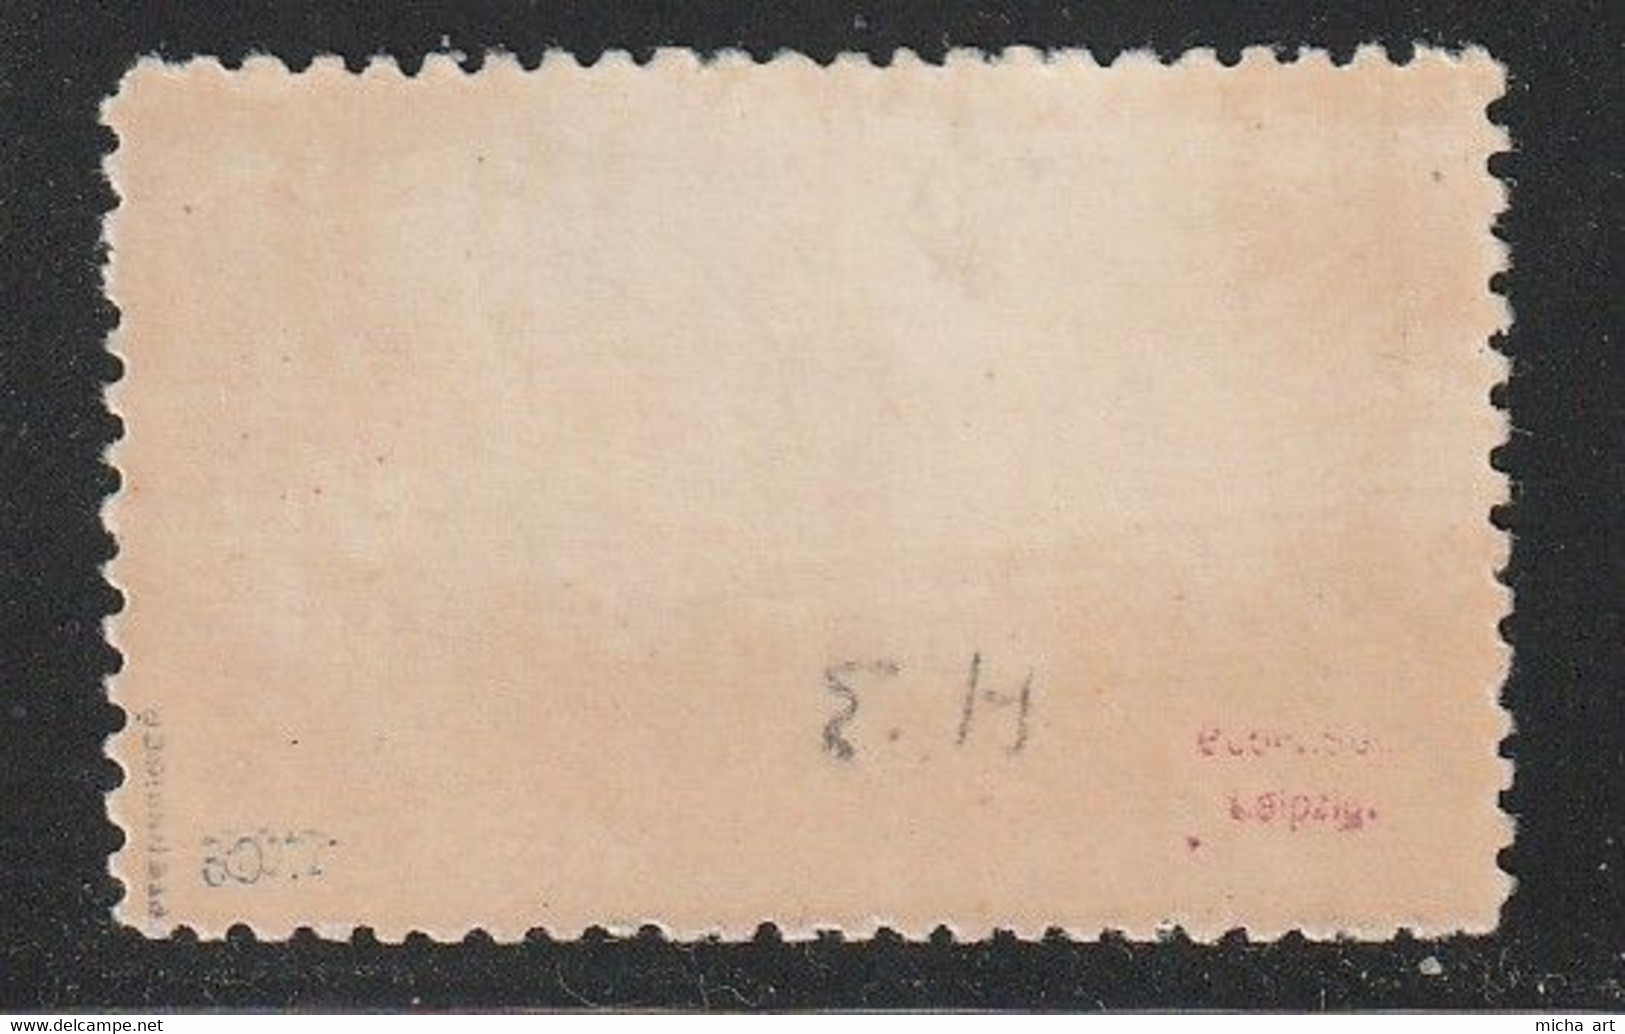 (B376-67) Greece 1913 Samos "Castles" Issue 10 Dr. With Sofoulis Initial Genuine Signed MH - Samos